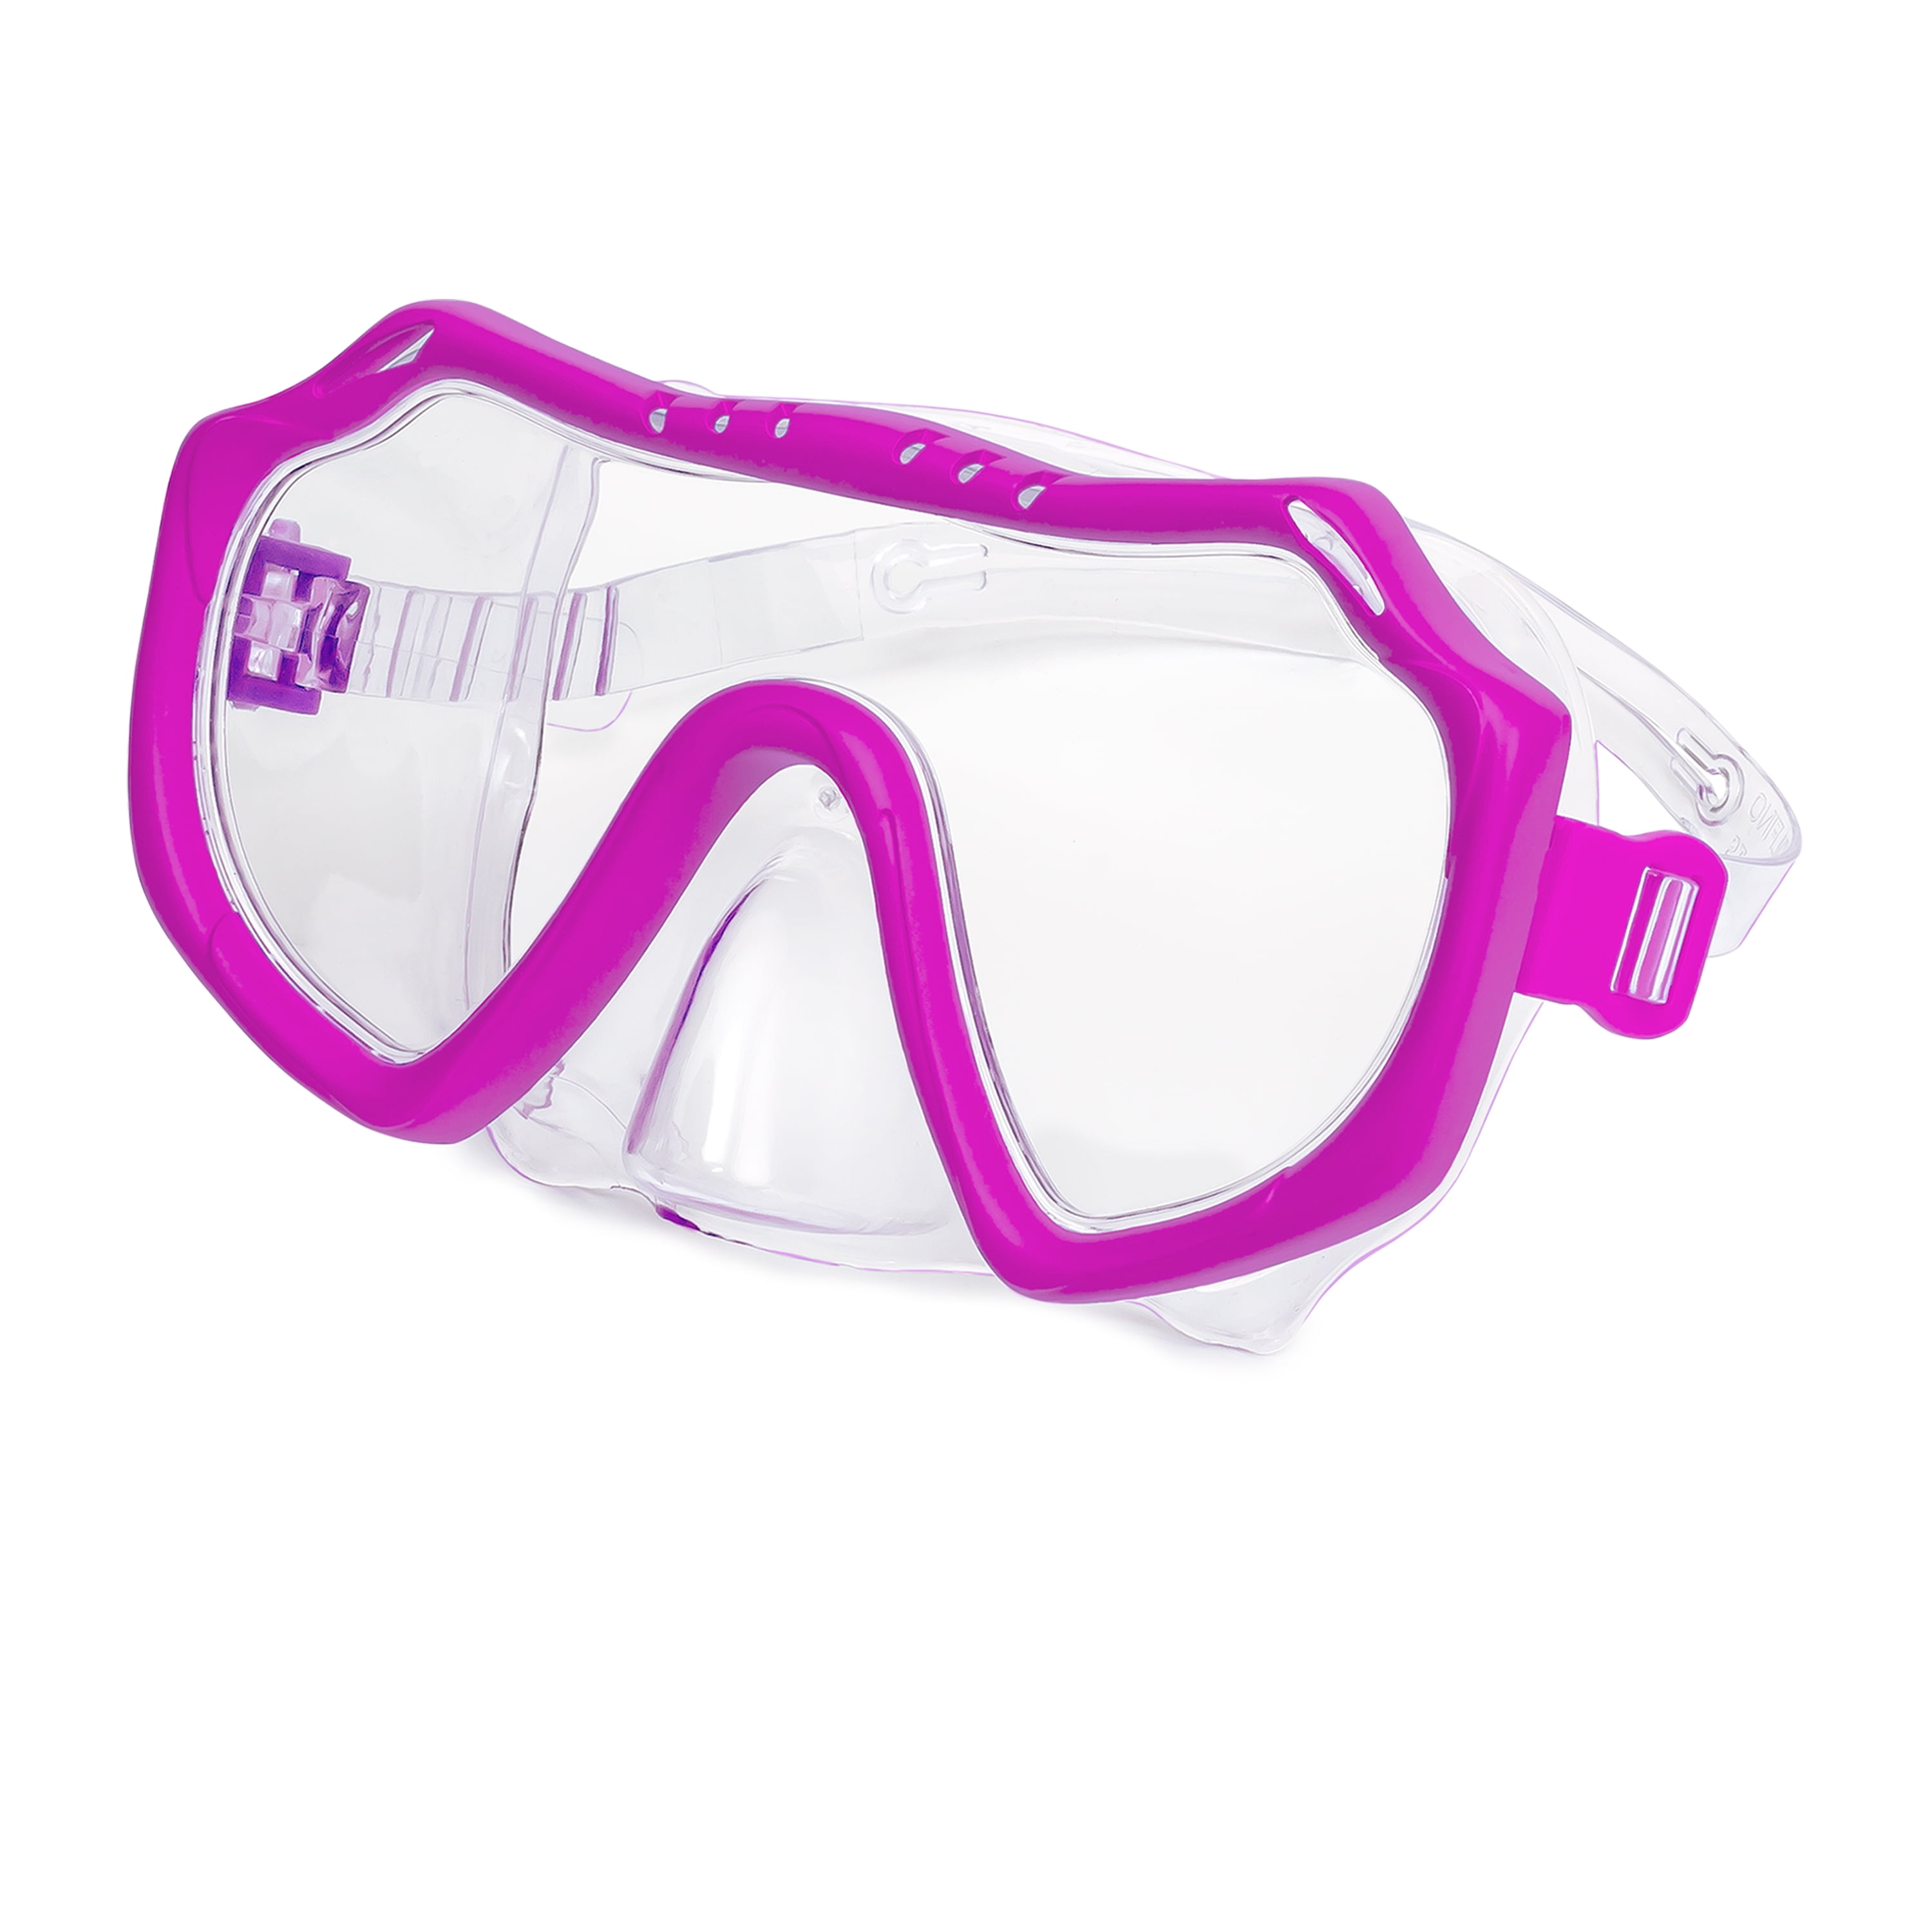 FREE SHIPPING! Water Goggles Pink ages 12+ Dolfino Premier Adult 